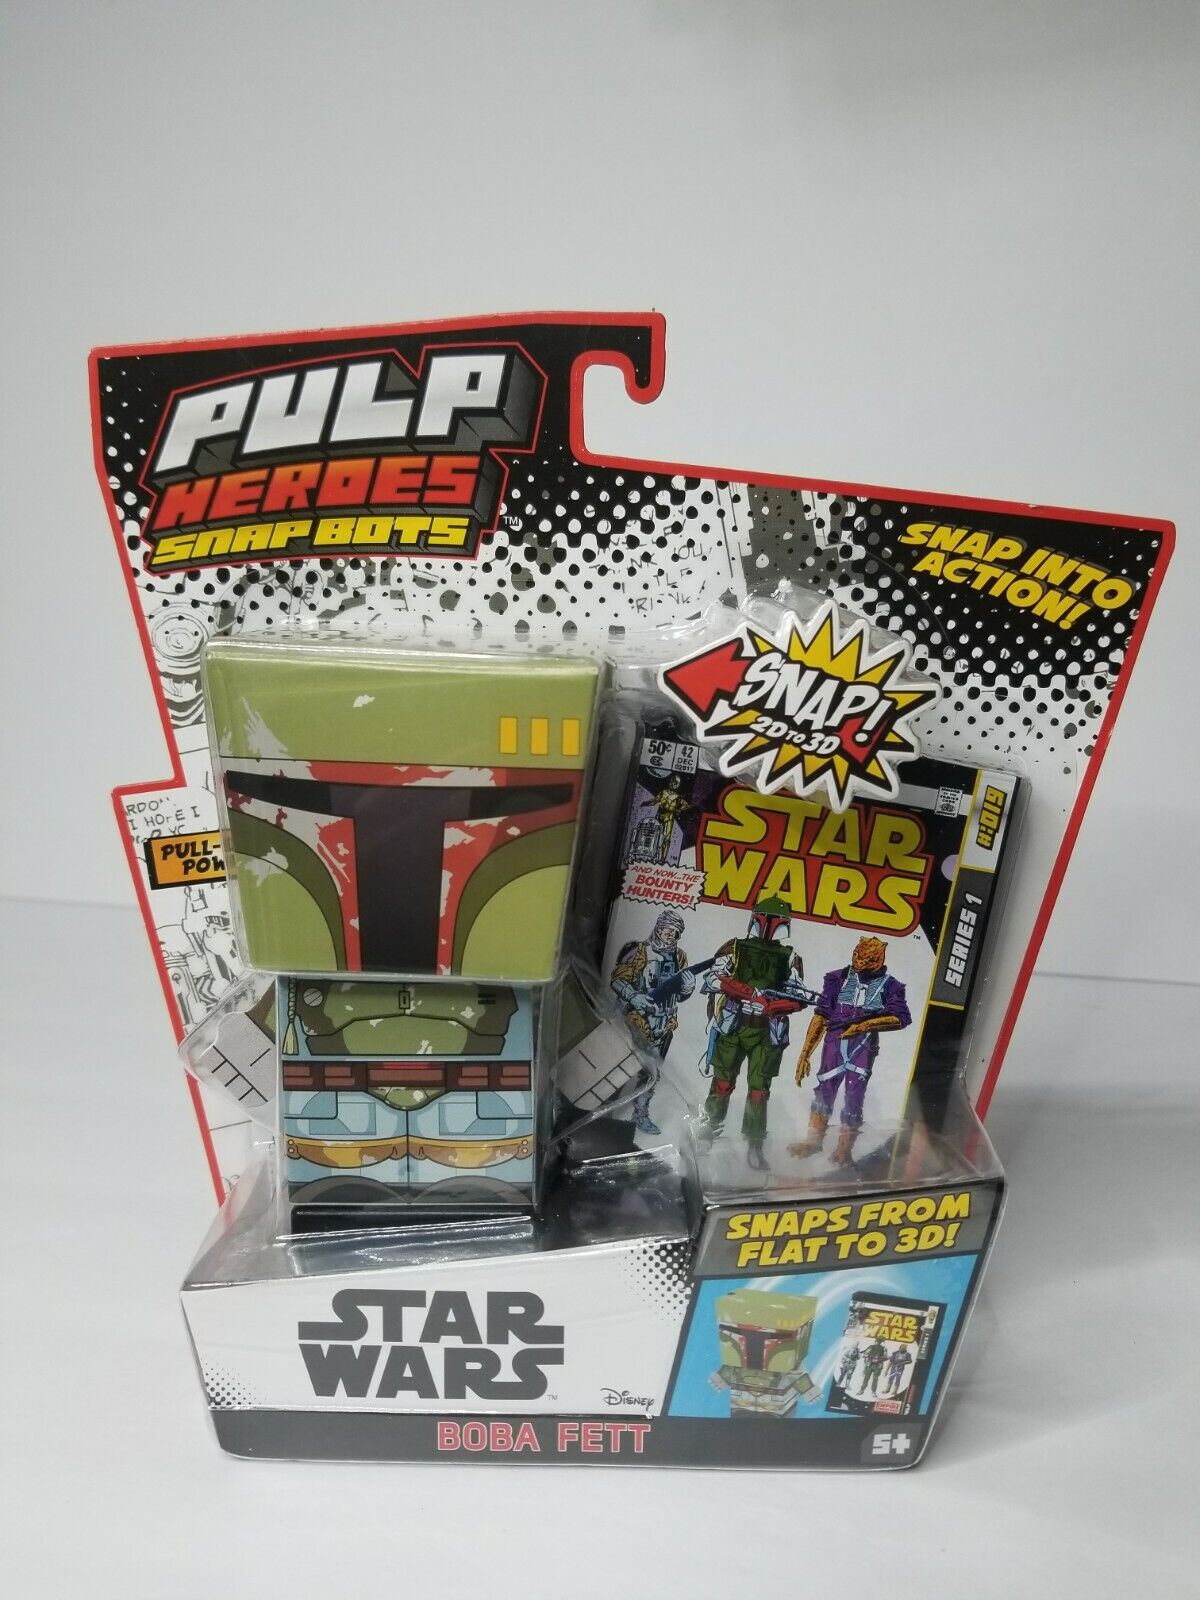 Star Wars Boba Fett SnapBot Pulp Heroes Pull Back Snaps from Flat 2D to 3D